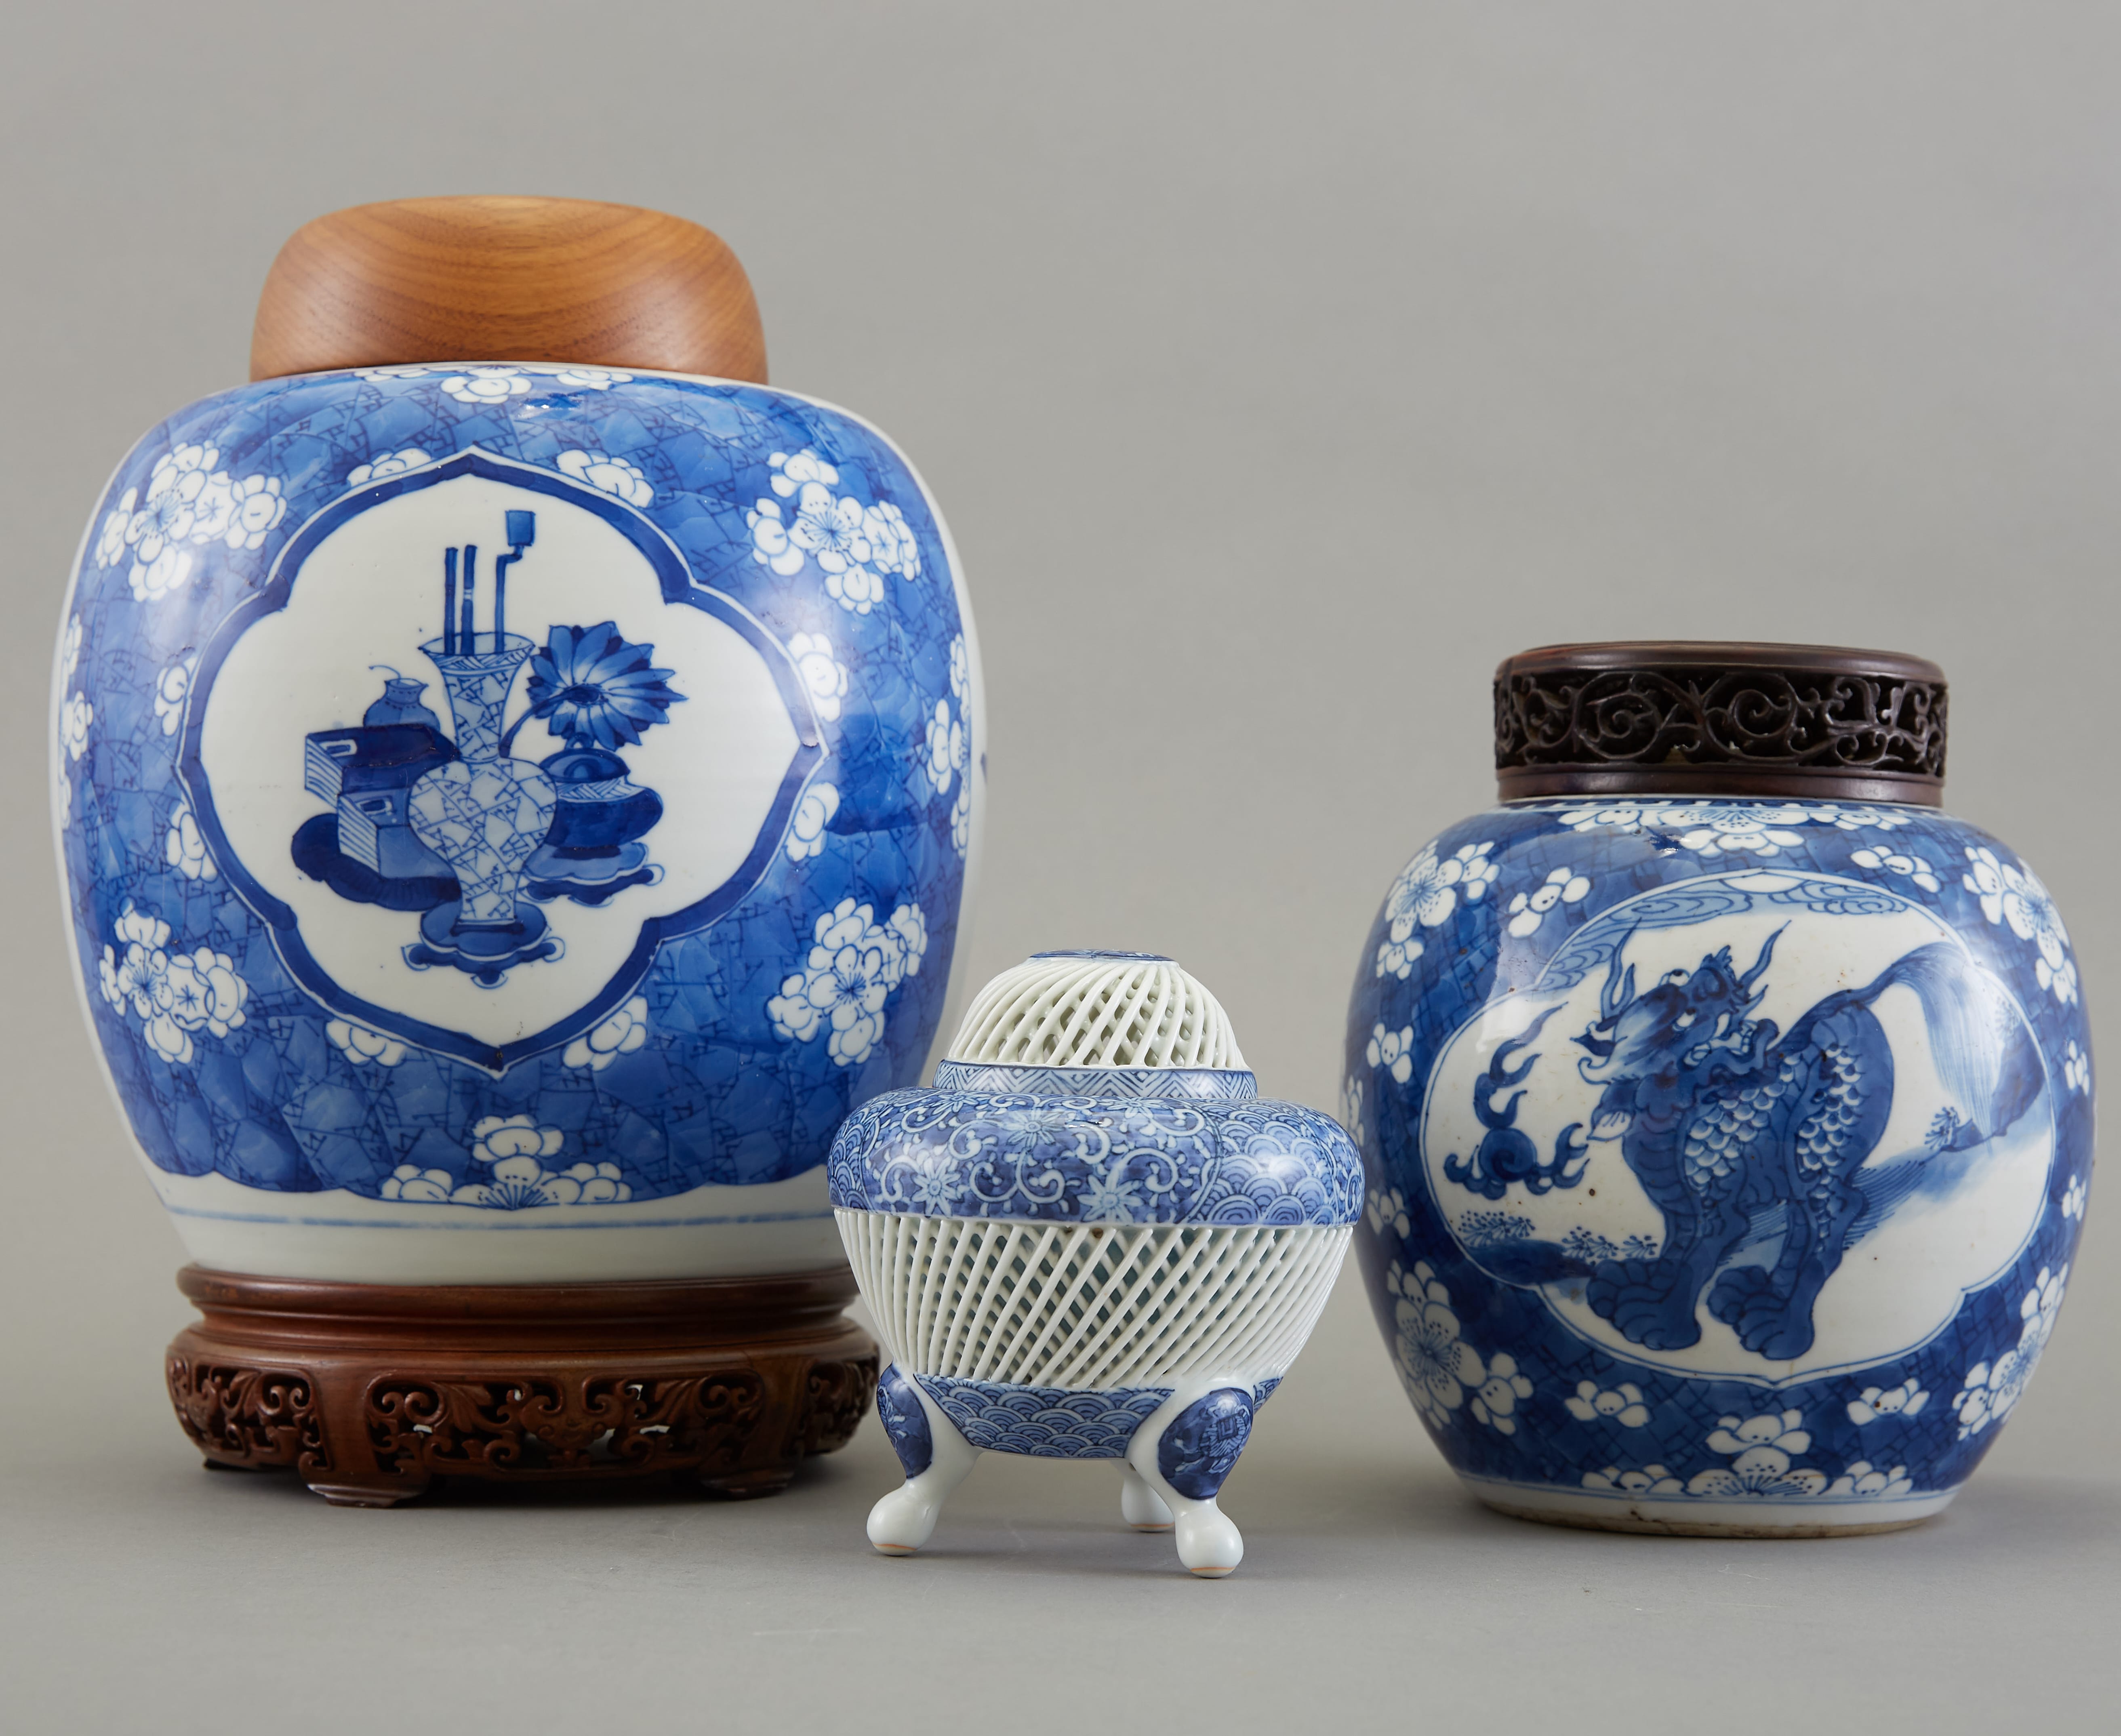 Lot 271: Group of 3 Pieces Chinese Blue and White Porcelain